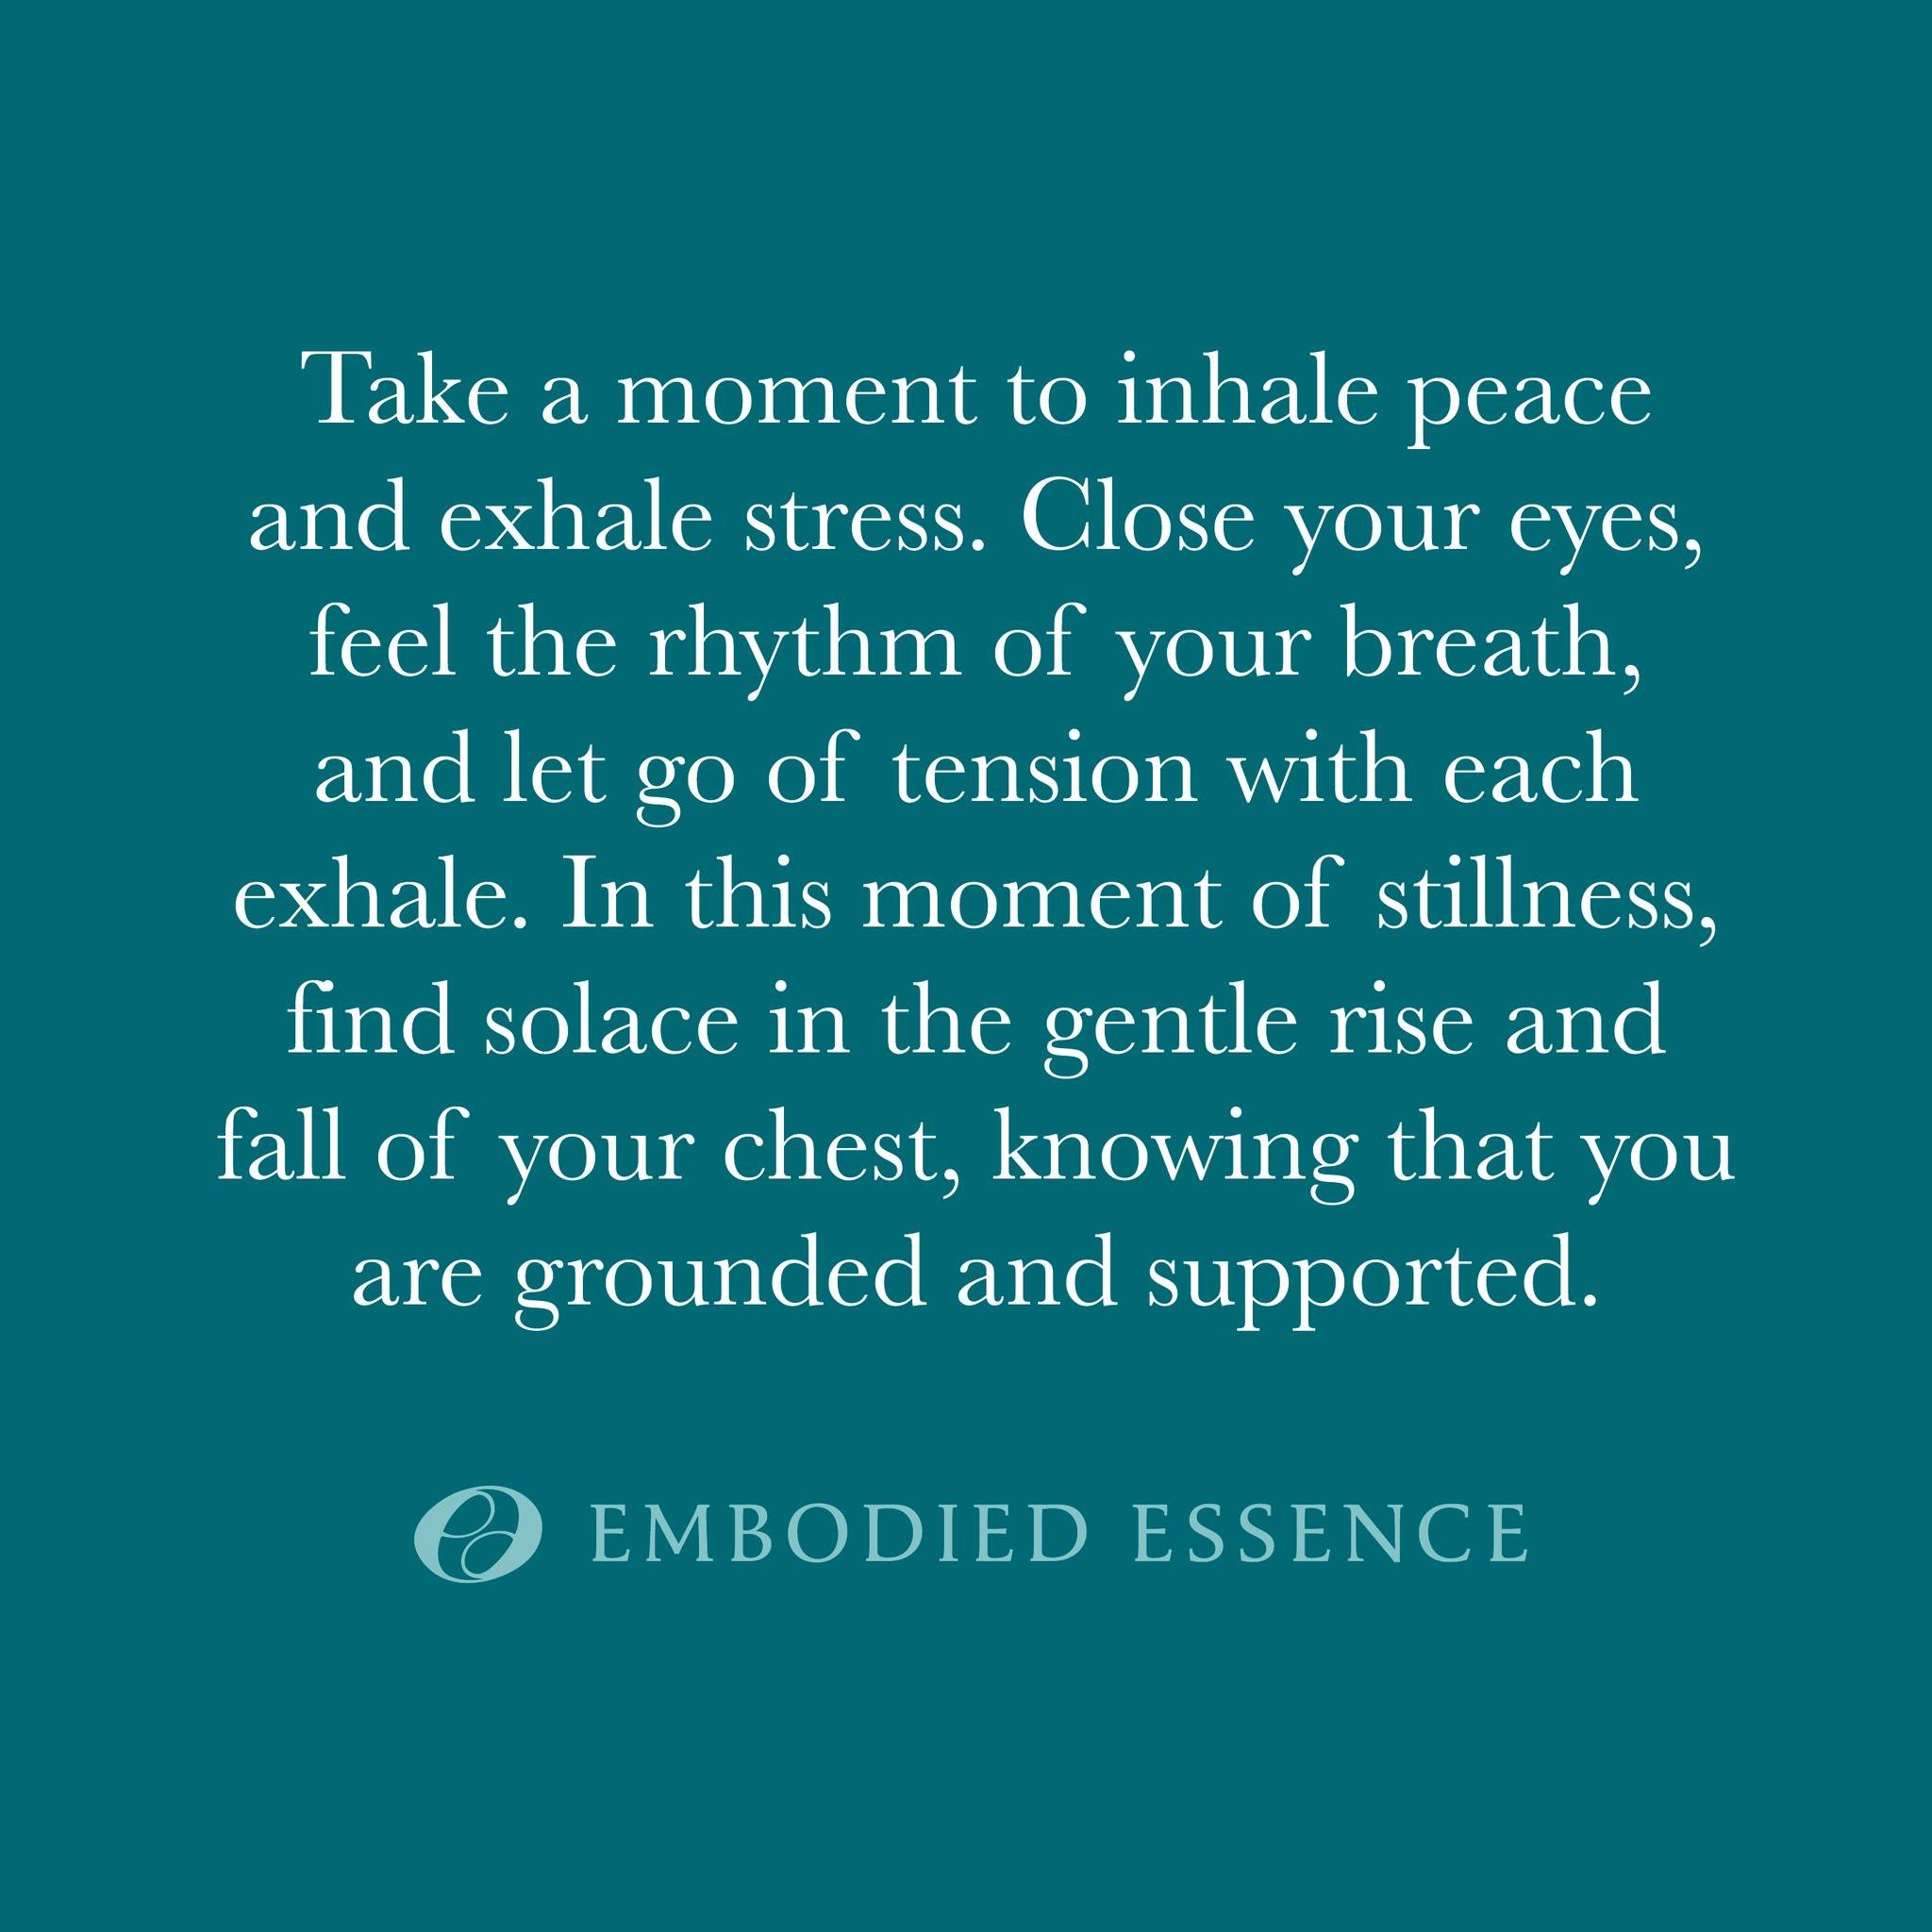 Take a moment to inhale peace and exhale stress. Close your eyes, feel the rhythm of your breath, and let go of tension with each exhale. In this moment of stillness, find solace in the gentle rise and fall of your chest, knowing that you are grounde